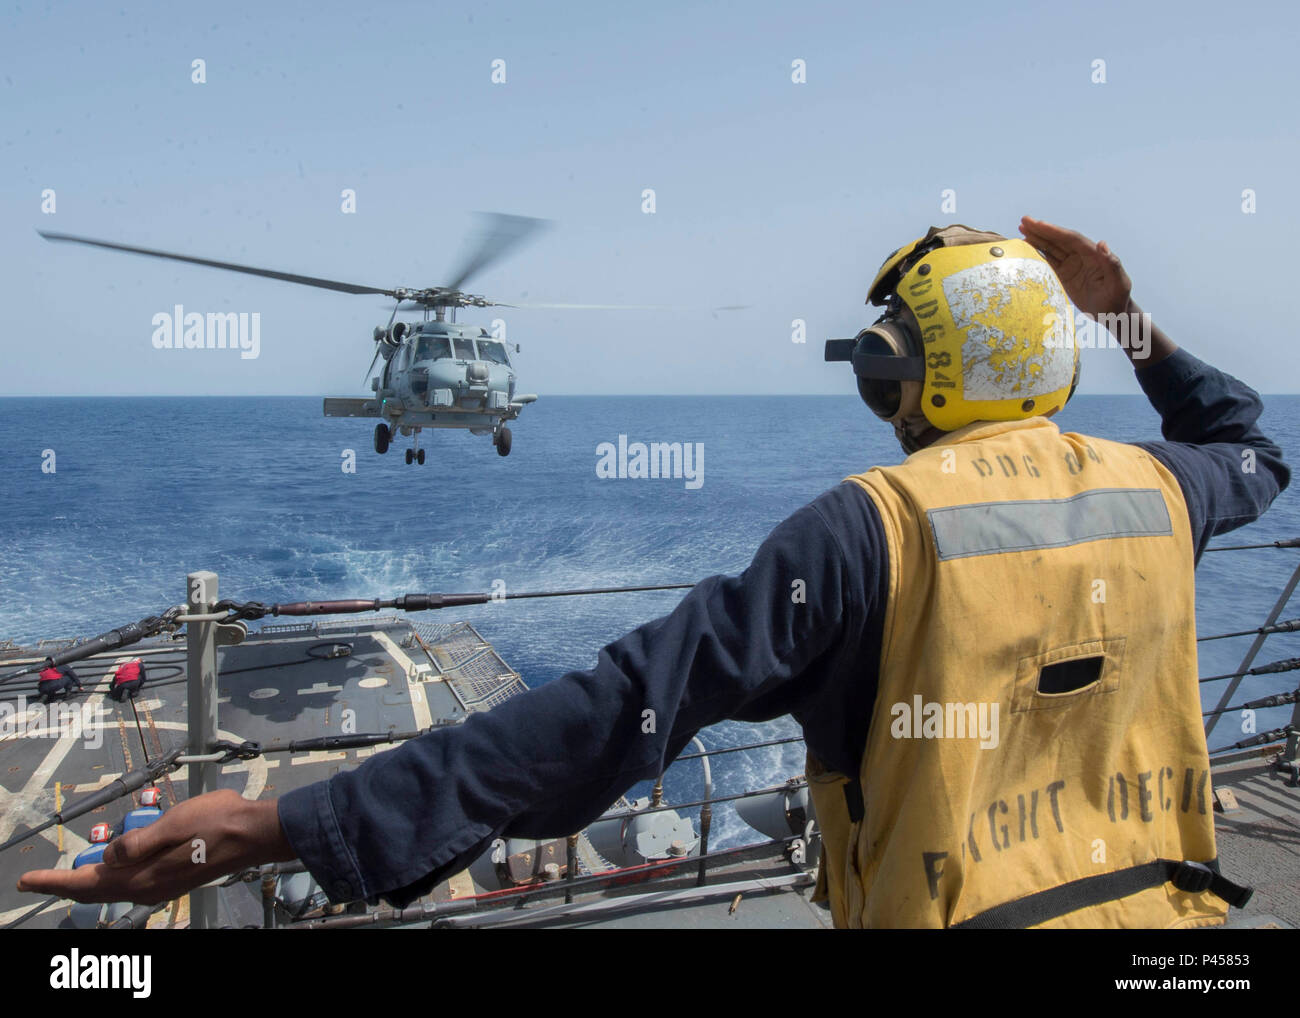 160612-N-AO823-088 RED SEA (June 12, 2016) Boatswain's Mate Seaman Jabri Singleton signals an MH-60R Sea Hawk helicopter, assigned to the 'Proud Warriors' of Helicopter Maritime Strike Squadron (HSM) 72, during a helicopter in-flight refueling exercise aboard guided-missile destroyer USS Bulkeley (DDG 84). Bulkeley is deployed as part of the Harry S. Truman Carrier Strike Group in support of Operation Inherent Resolve, maritime security operations, and theater security cooperation efforts in the U.S. 5th Fleet area of operations. (U.S. Navy photo by Mass Communication Specialist 2nd Class Mich Stock Photo